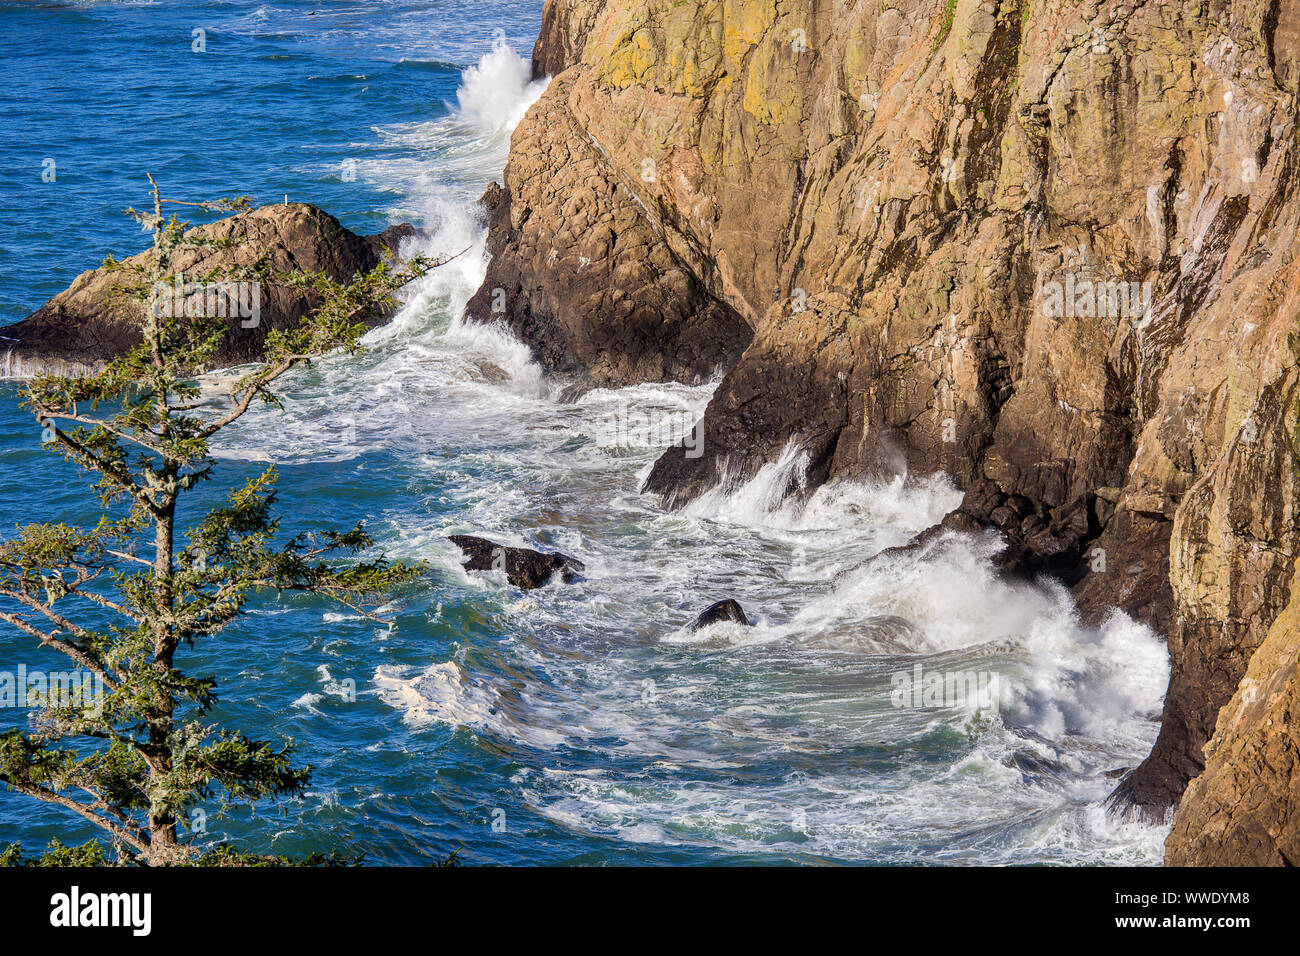 Dead Mans Cove, Cape Disappointment, Long Beach, Wa Stock Photo